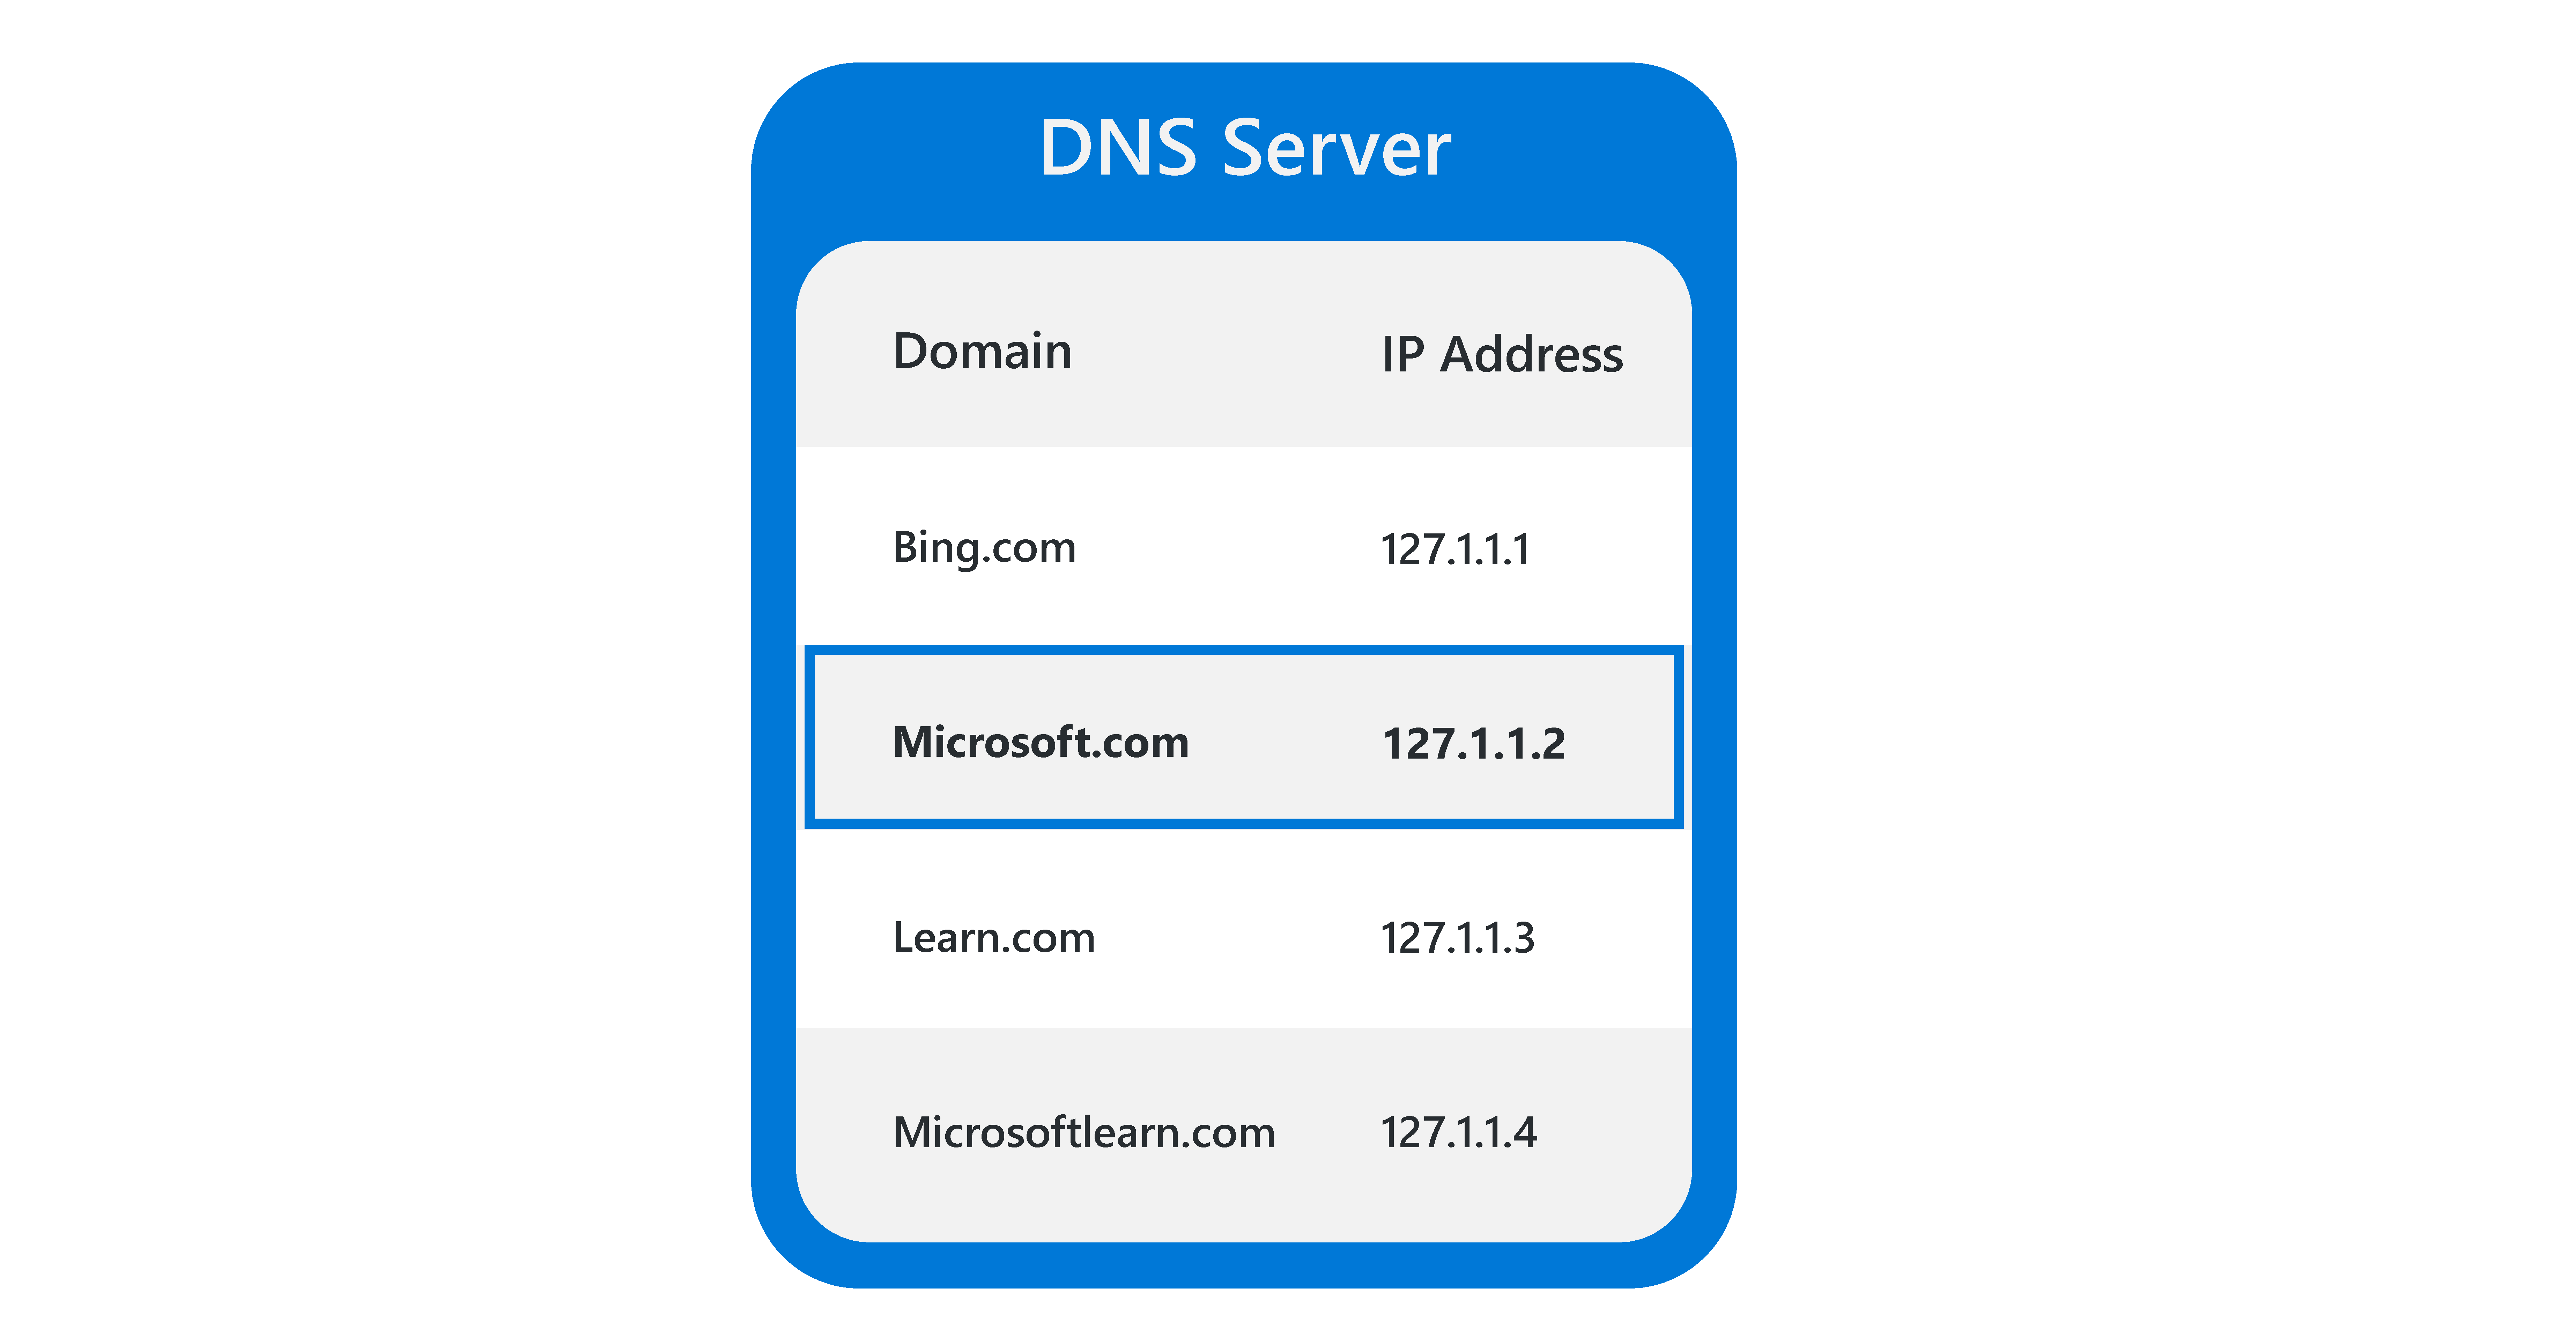 Diagram that shows a simplified representation of a DNS lookup table, where the domain microsoft.com has been found and gives the corresponding IP address.